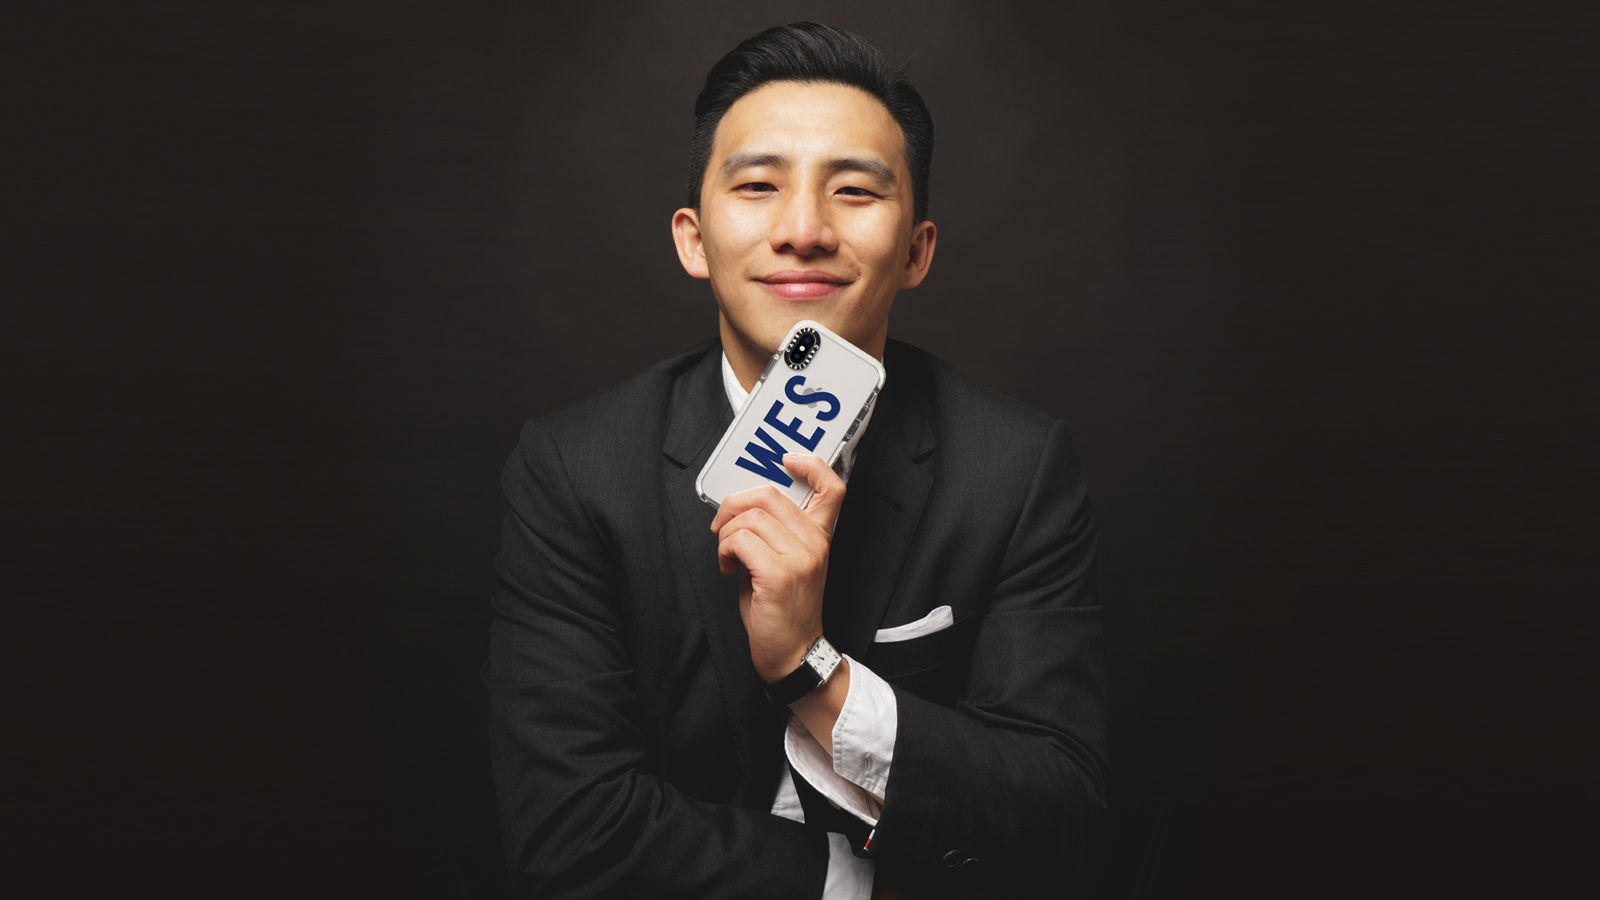 27 Questions: Wesley Ng, CEO and co-founder of Casetify